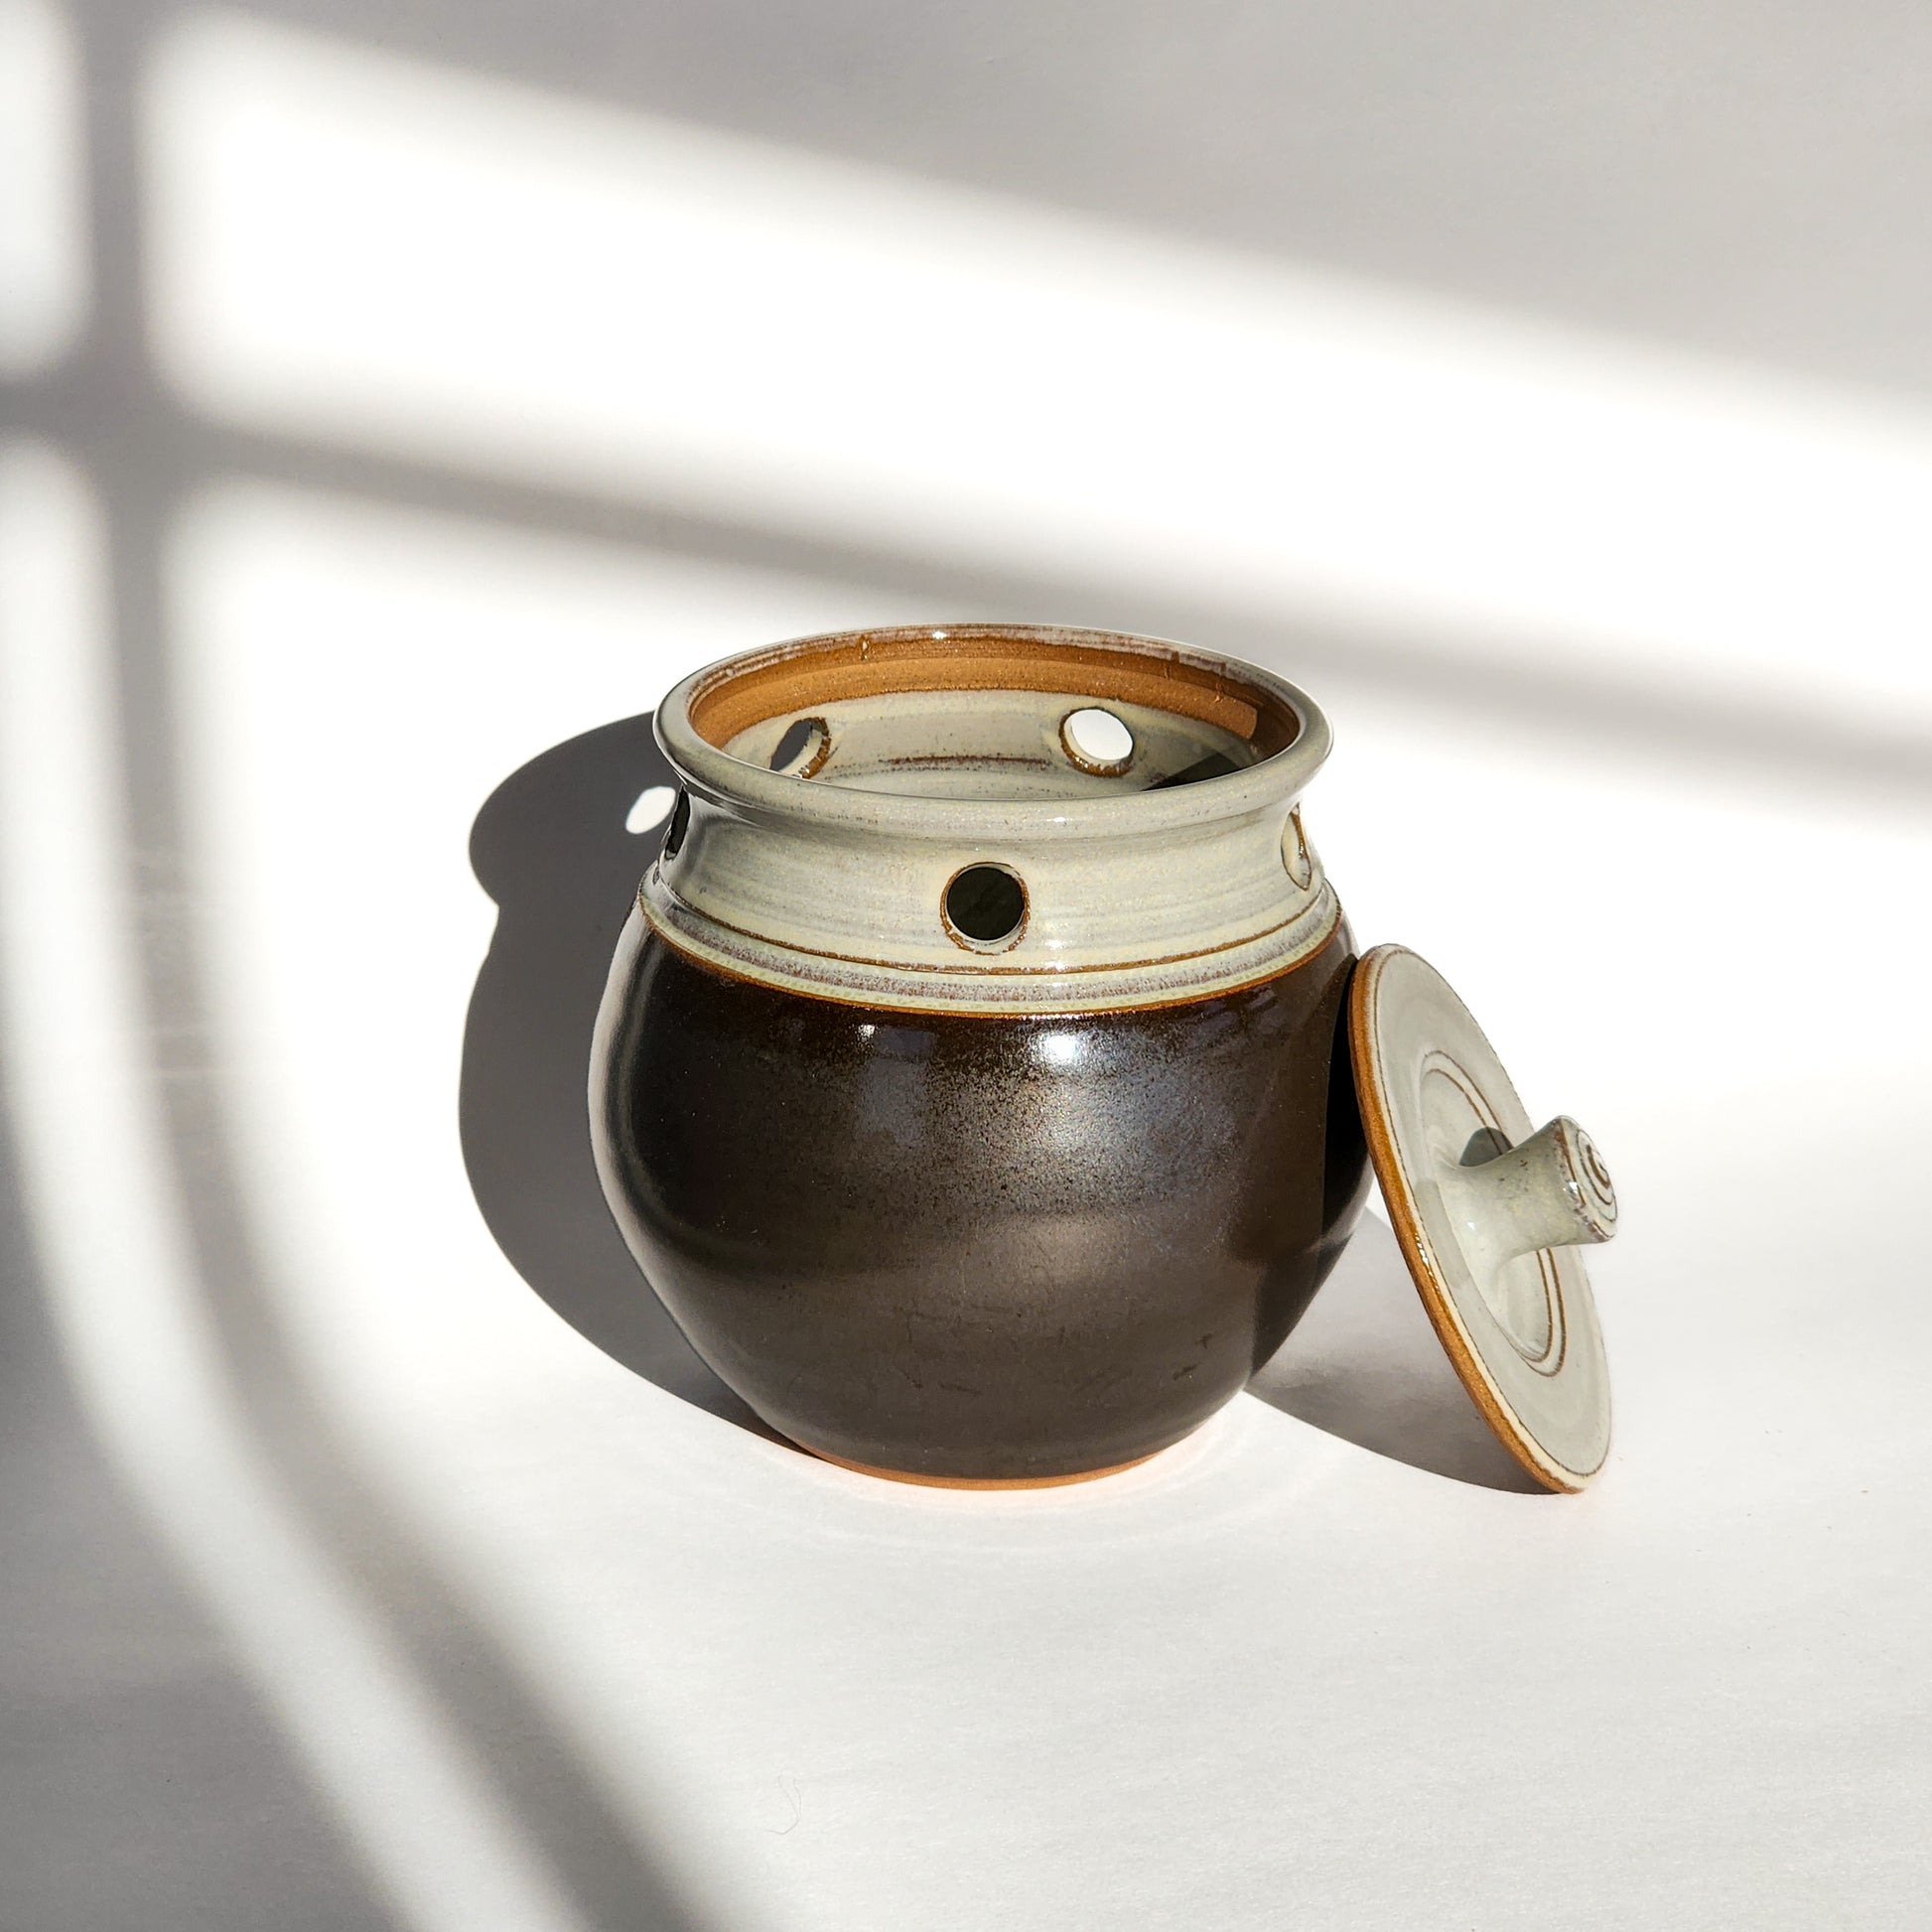 Image: A licorice glazed ceramic garlic keeper, designed to store garlic bulbs and add elegance to any kitchen.